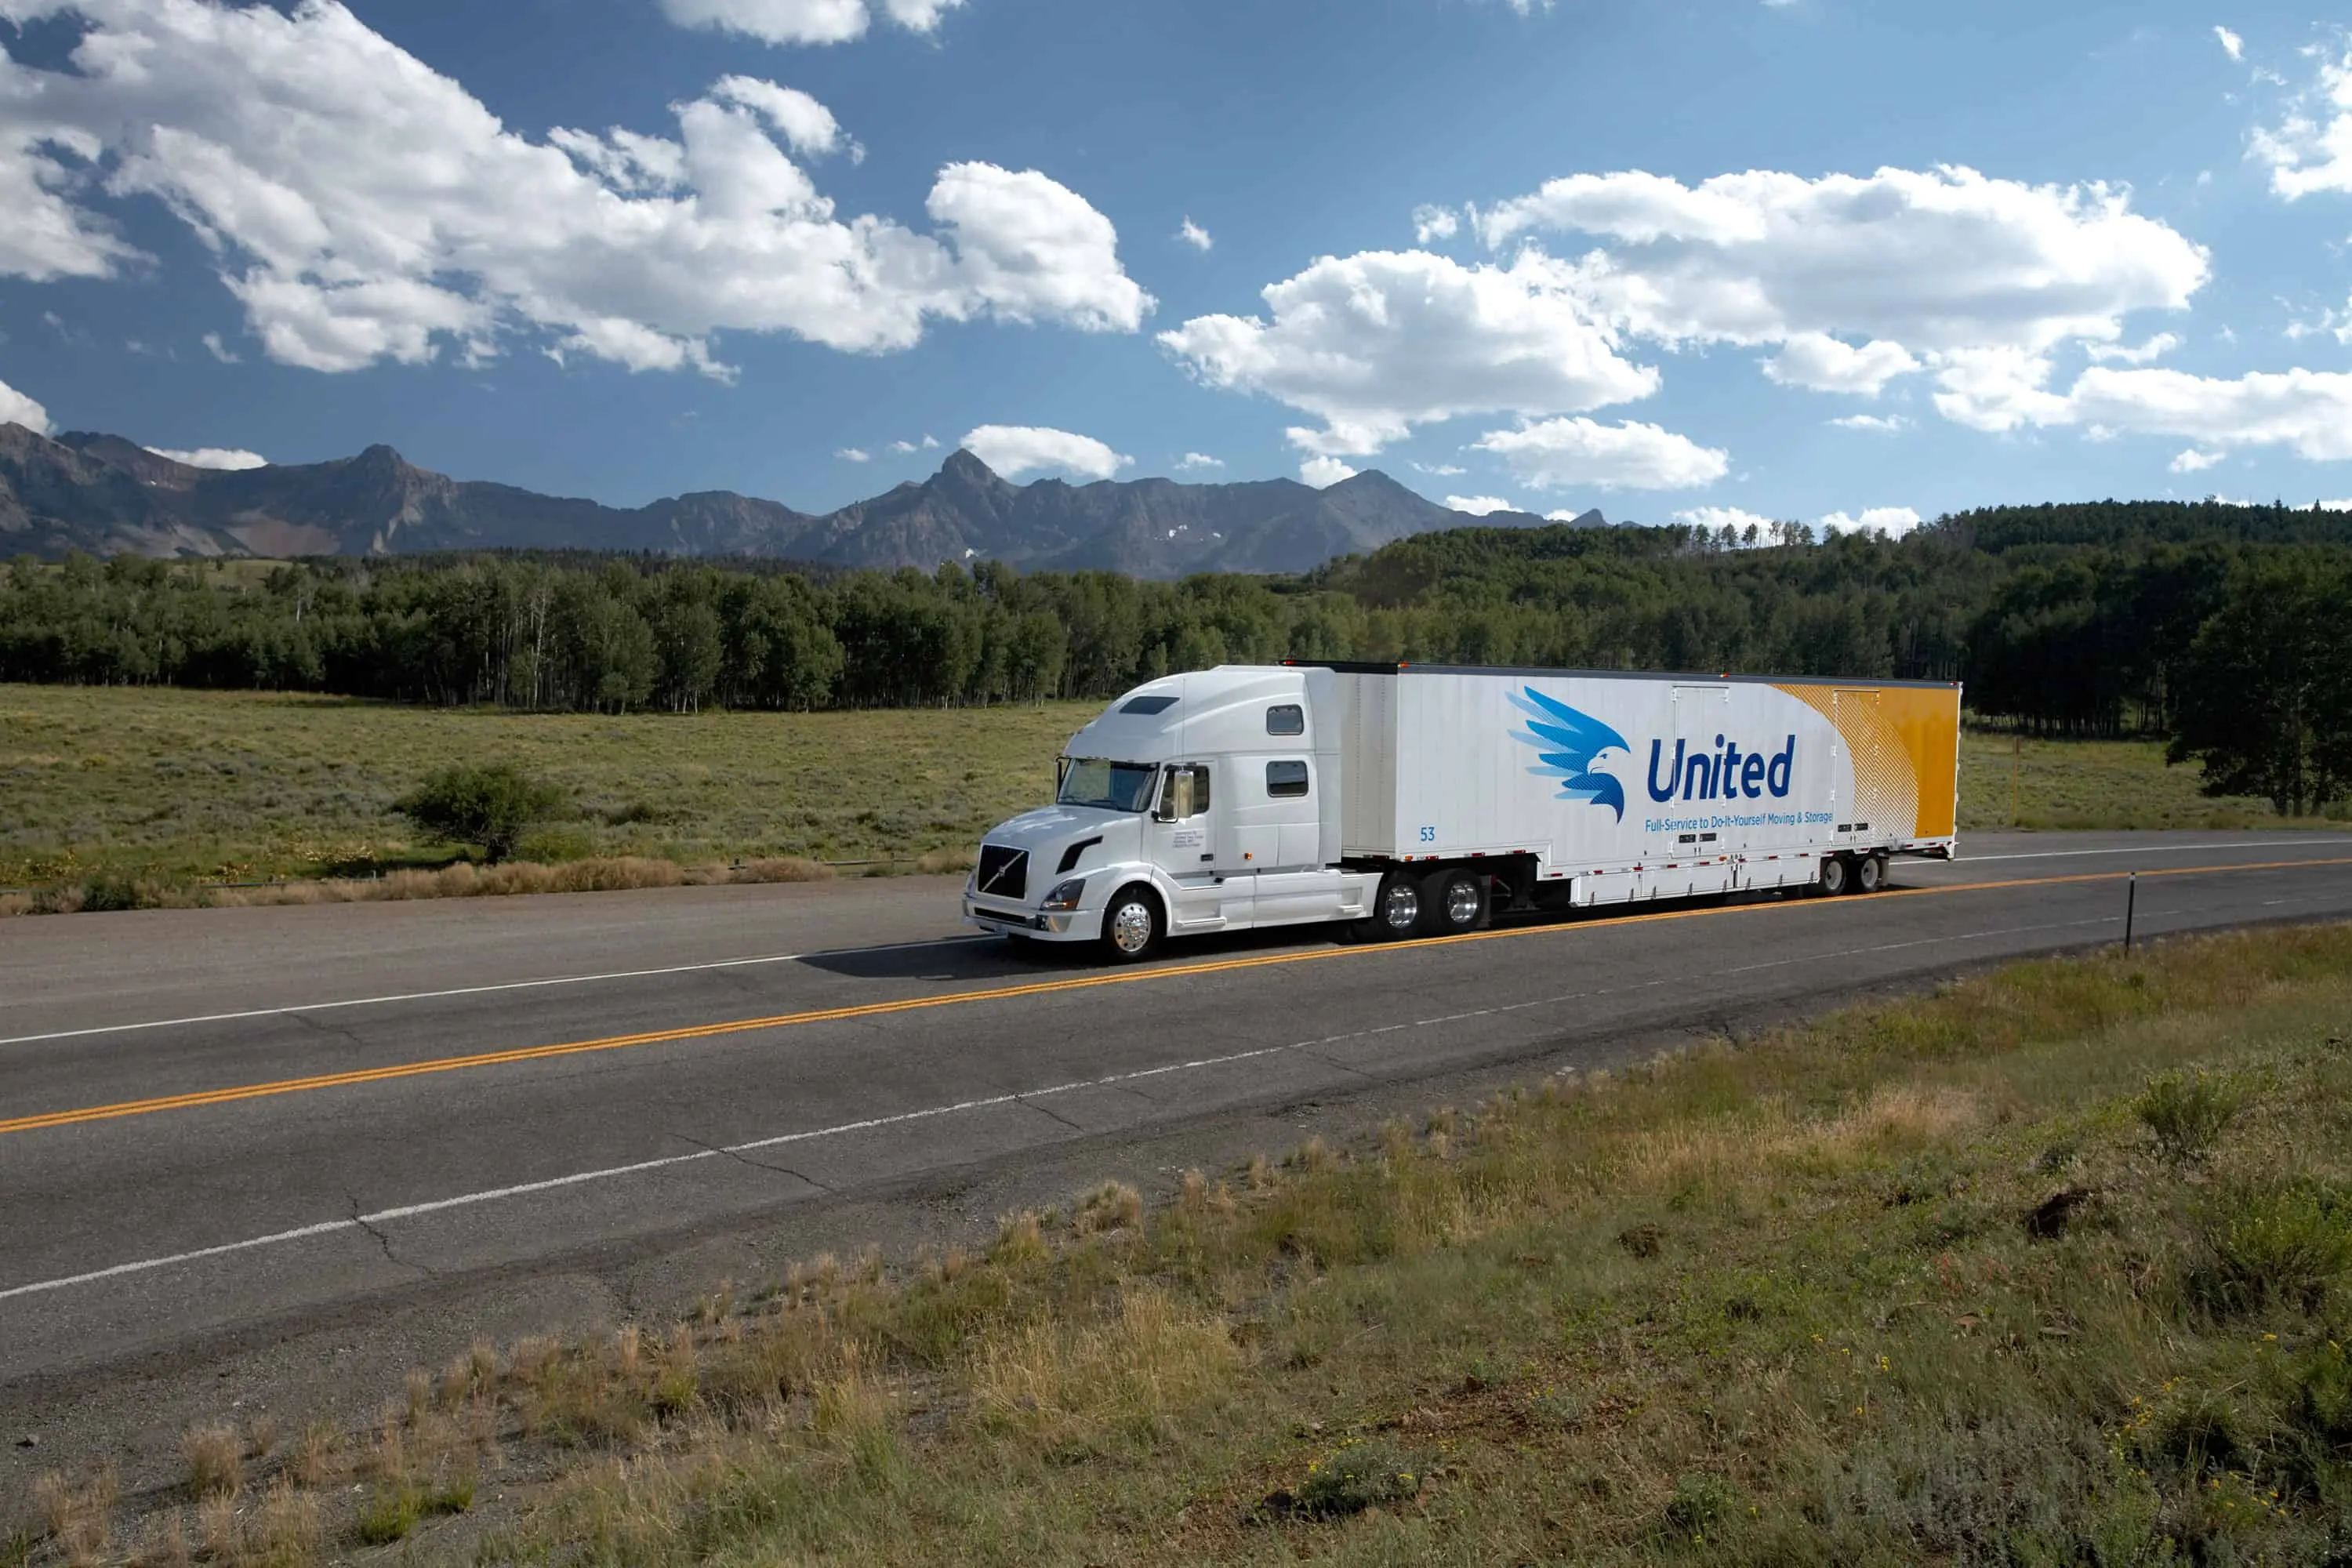 Car Shipping - Unted truck driving on a rural highway with trees and mountains in the distance - United Van Lines